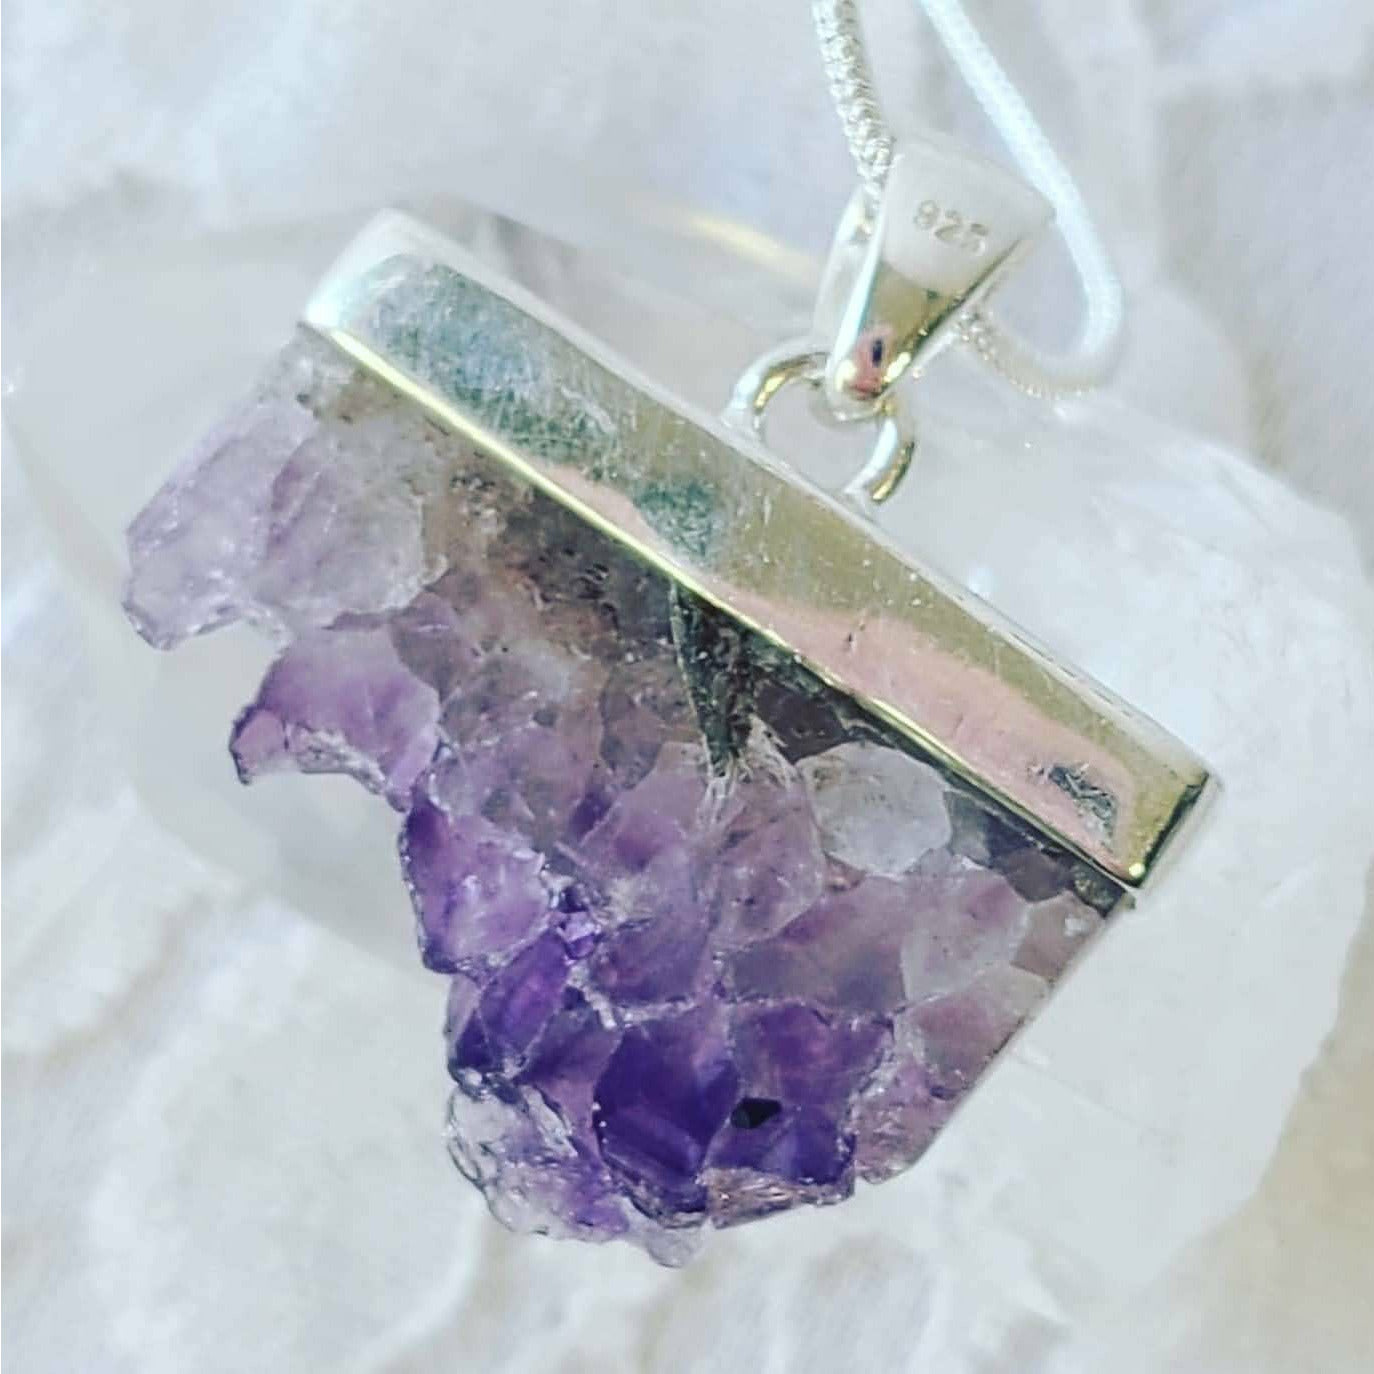 Amethyst Stalactite Slice Pendant w/ .925 Sterling Silver Necklace ~ On 20" Chain BEAUTIFL!